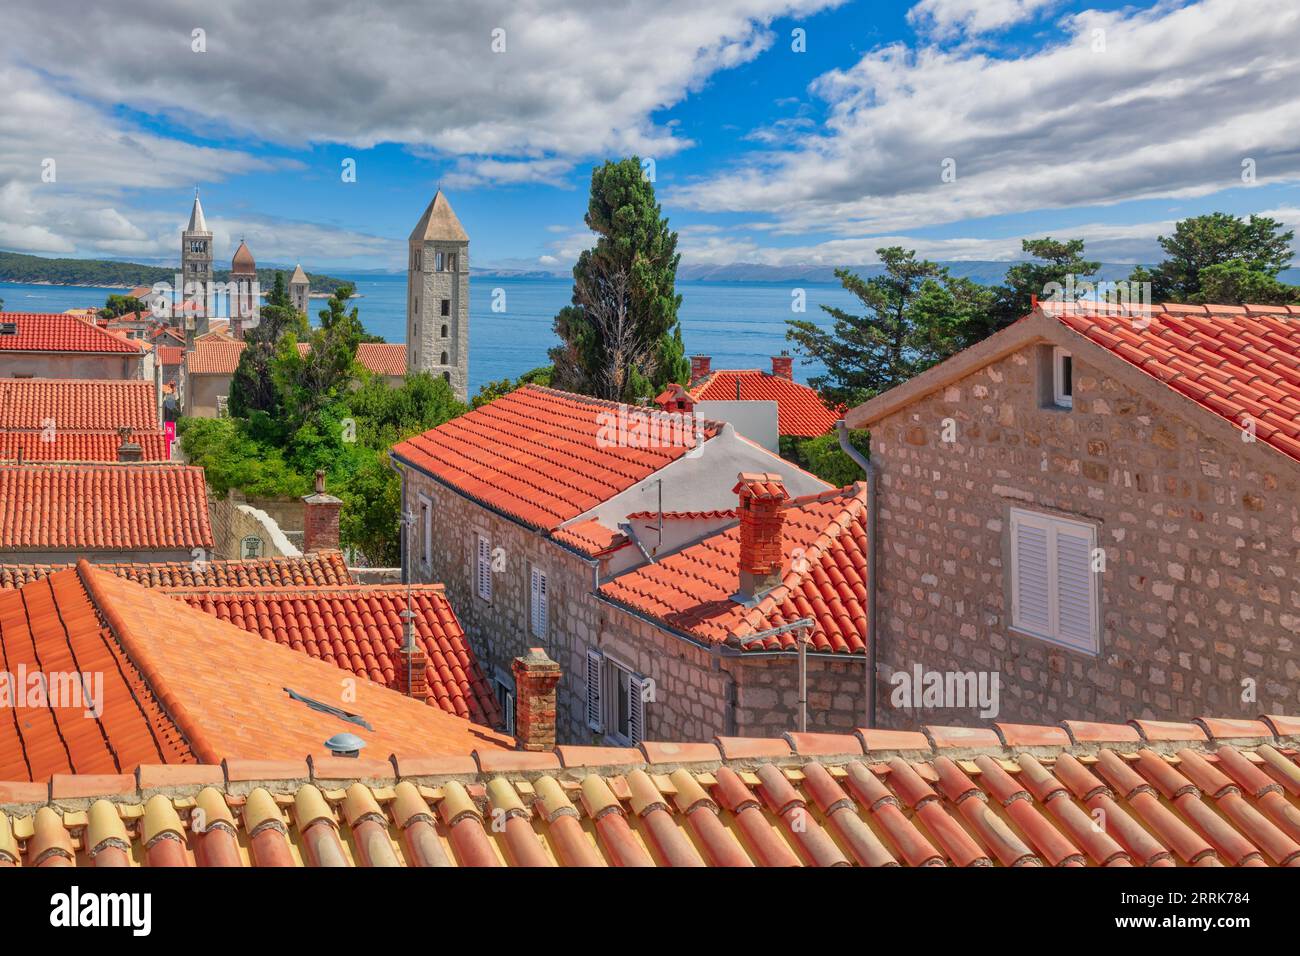 Europe, Croatia, Primorje-Gorski Kotar County, island of Rab, view of the old town of Rab with the characteristic four bell towers Stock Photo